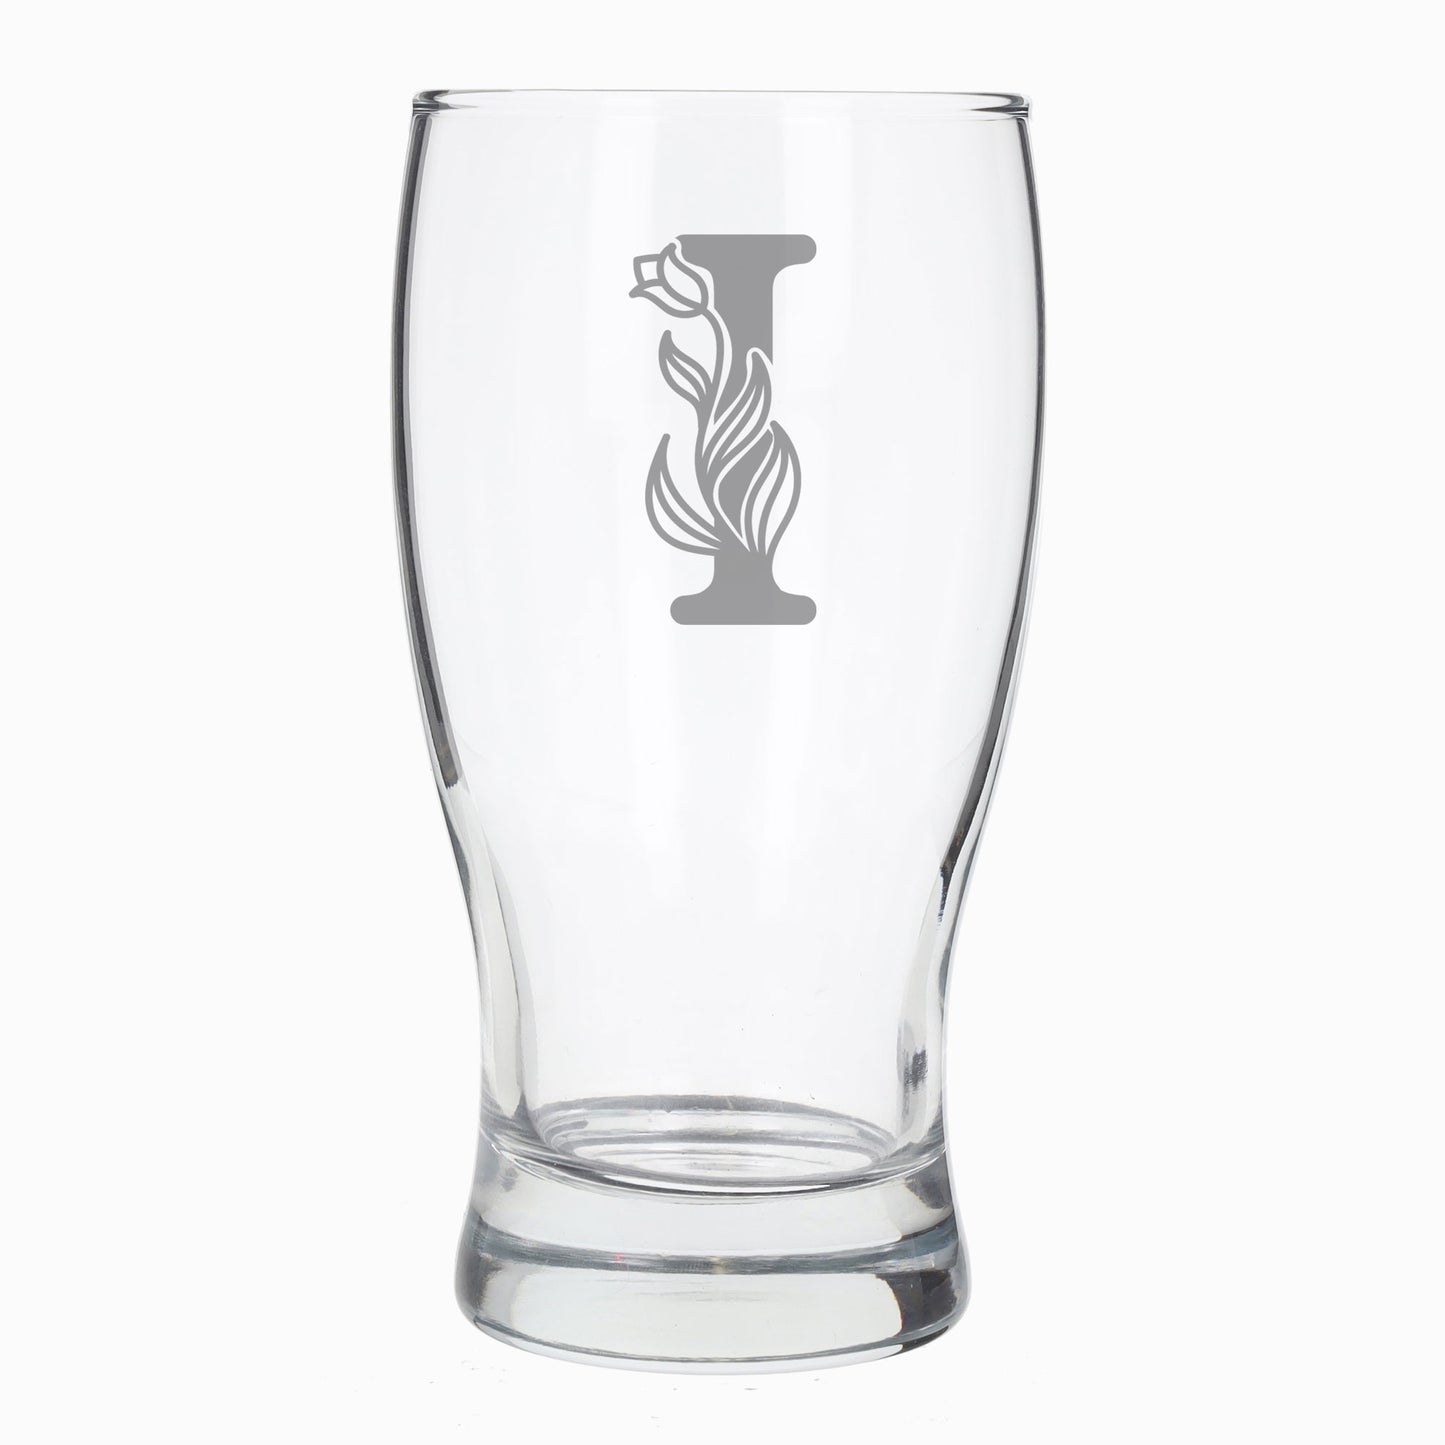 Monogram Engraved Beer Pint Glass and/or Coaster Set  - Always Looking Good - Beer Glass Only  